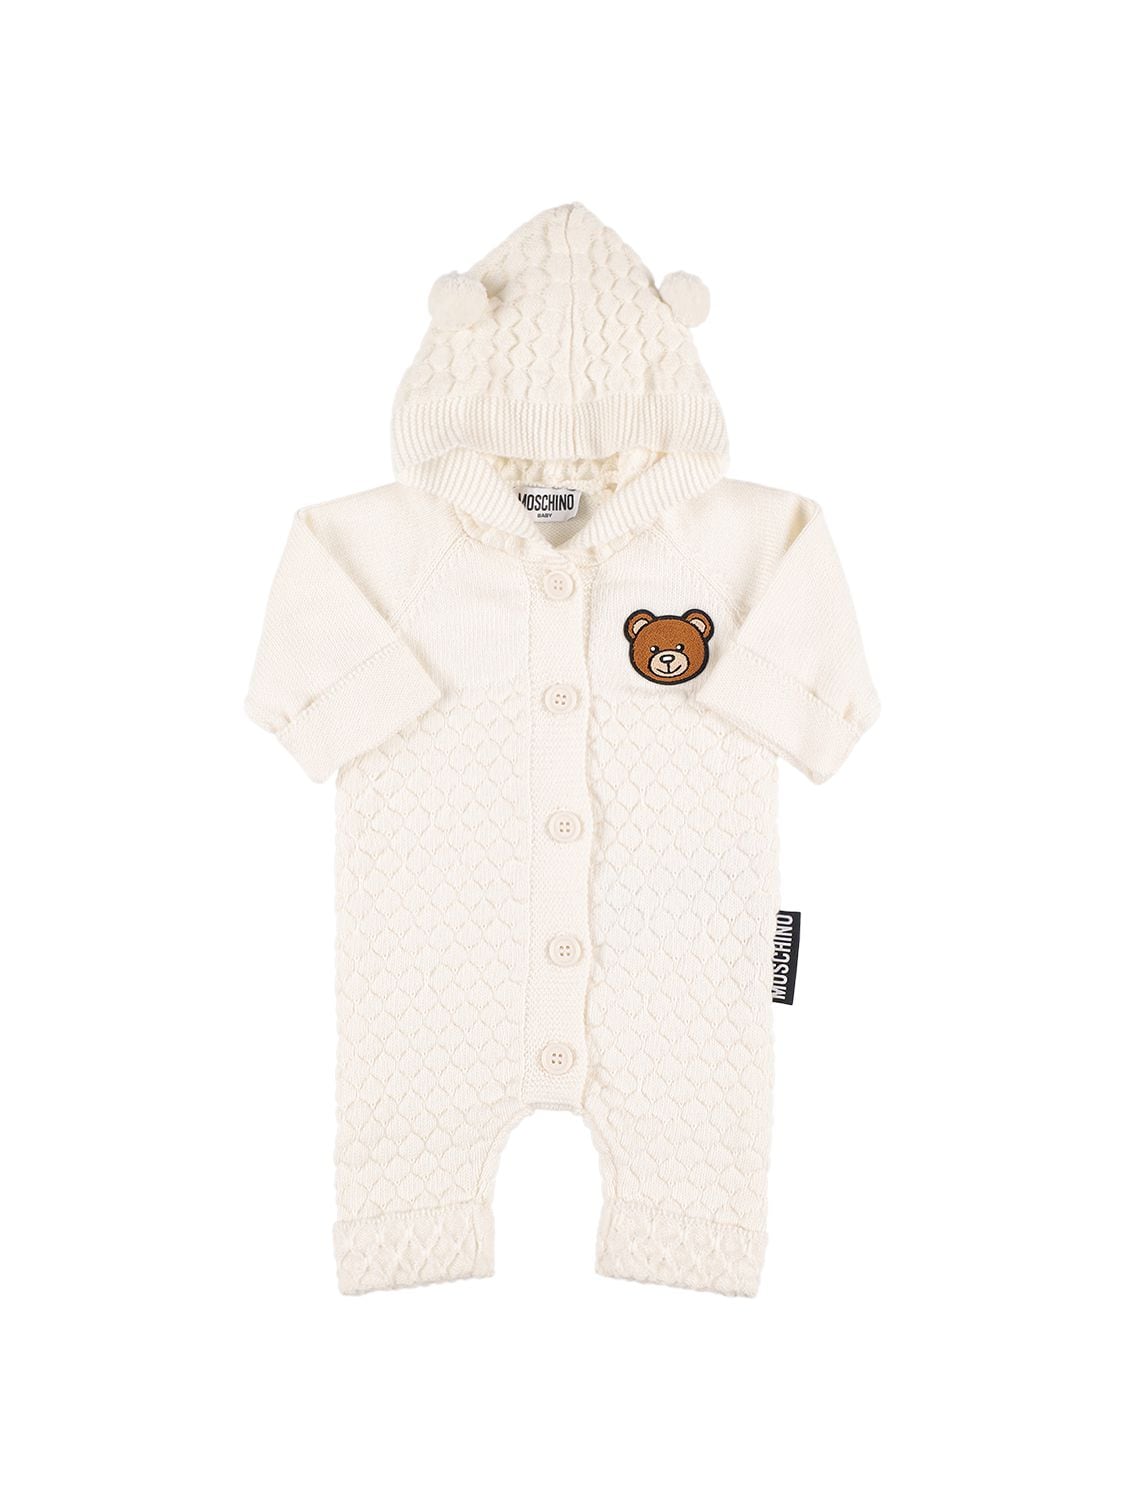 Moschino Babies' Cotton & Wool Romper W/ Patch In Light Blue